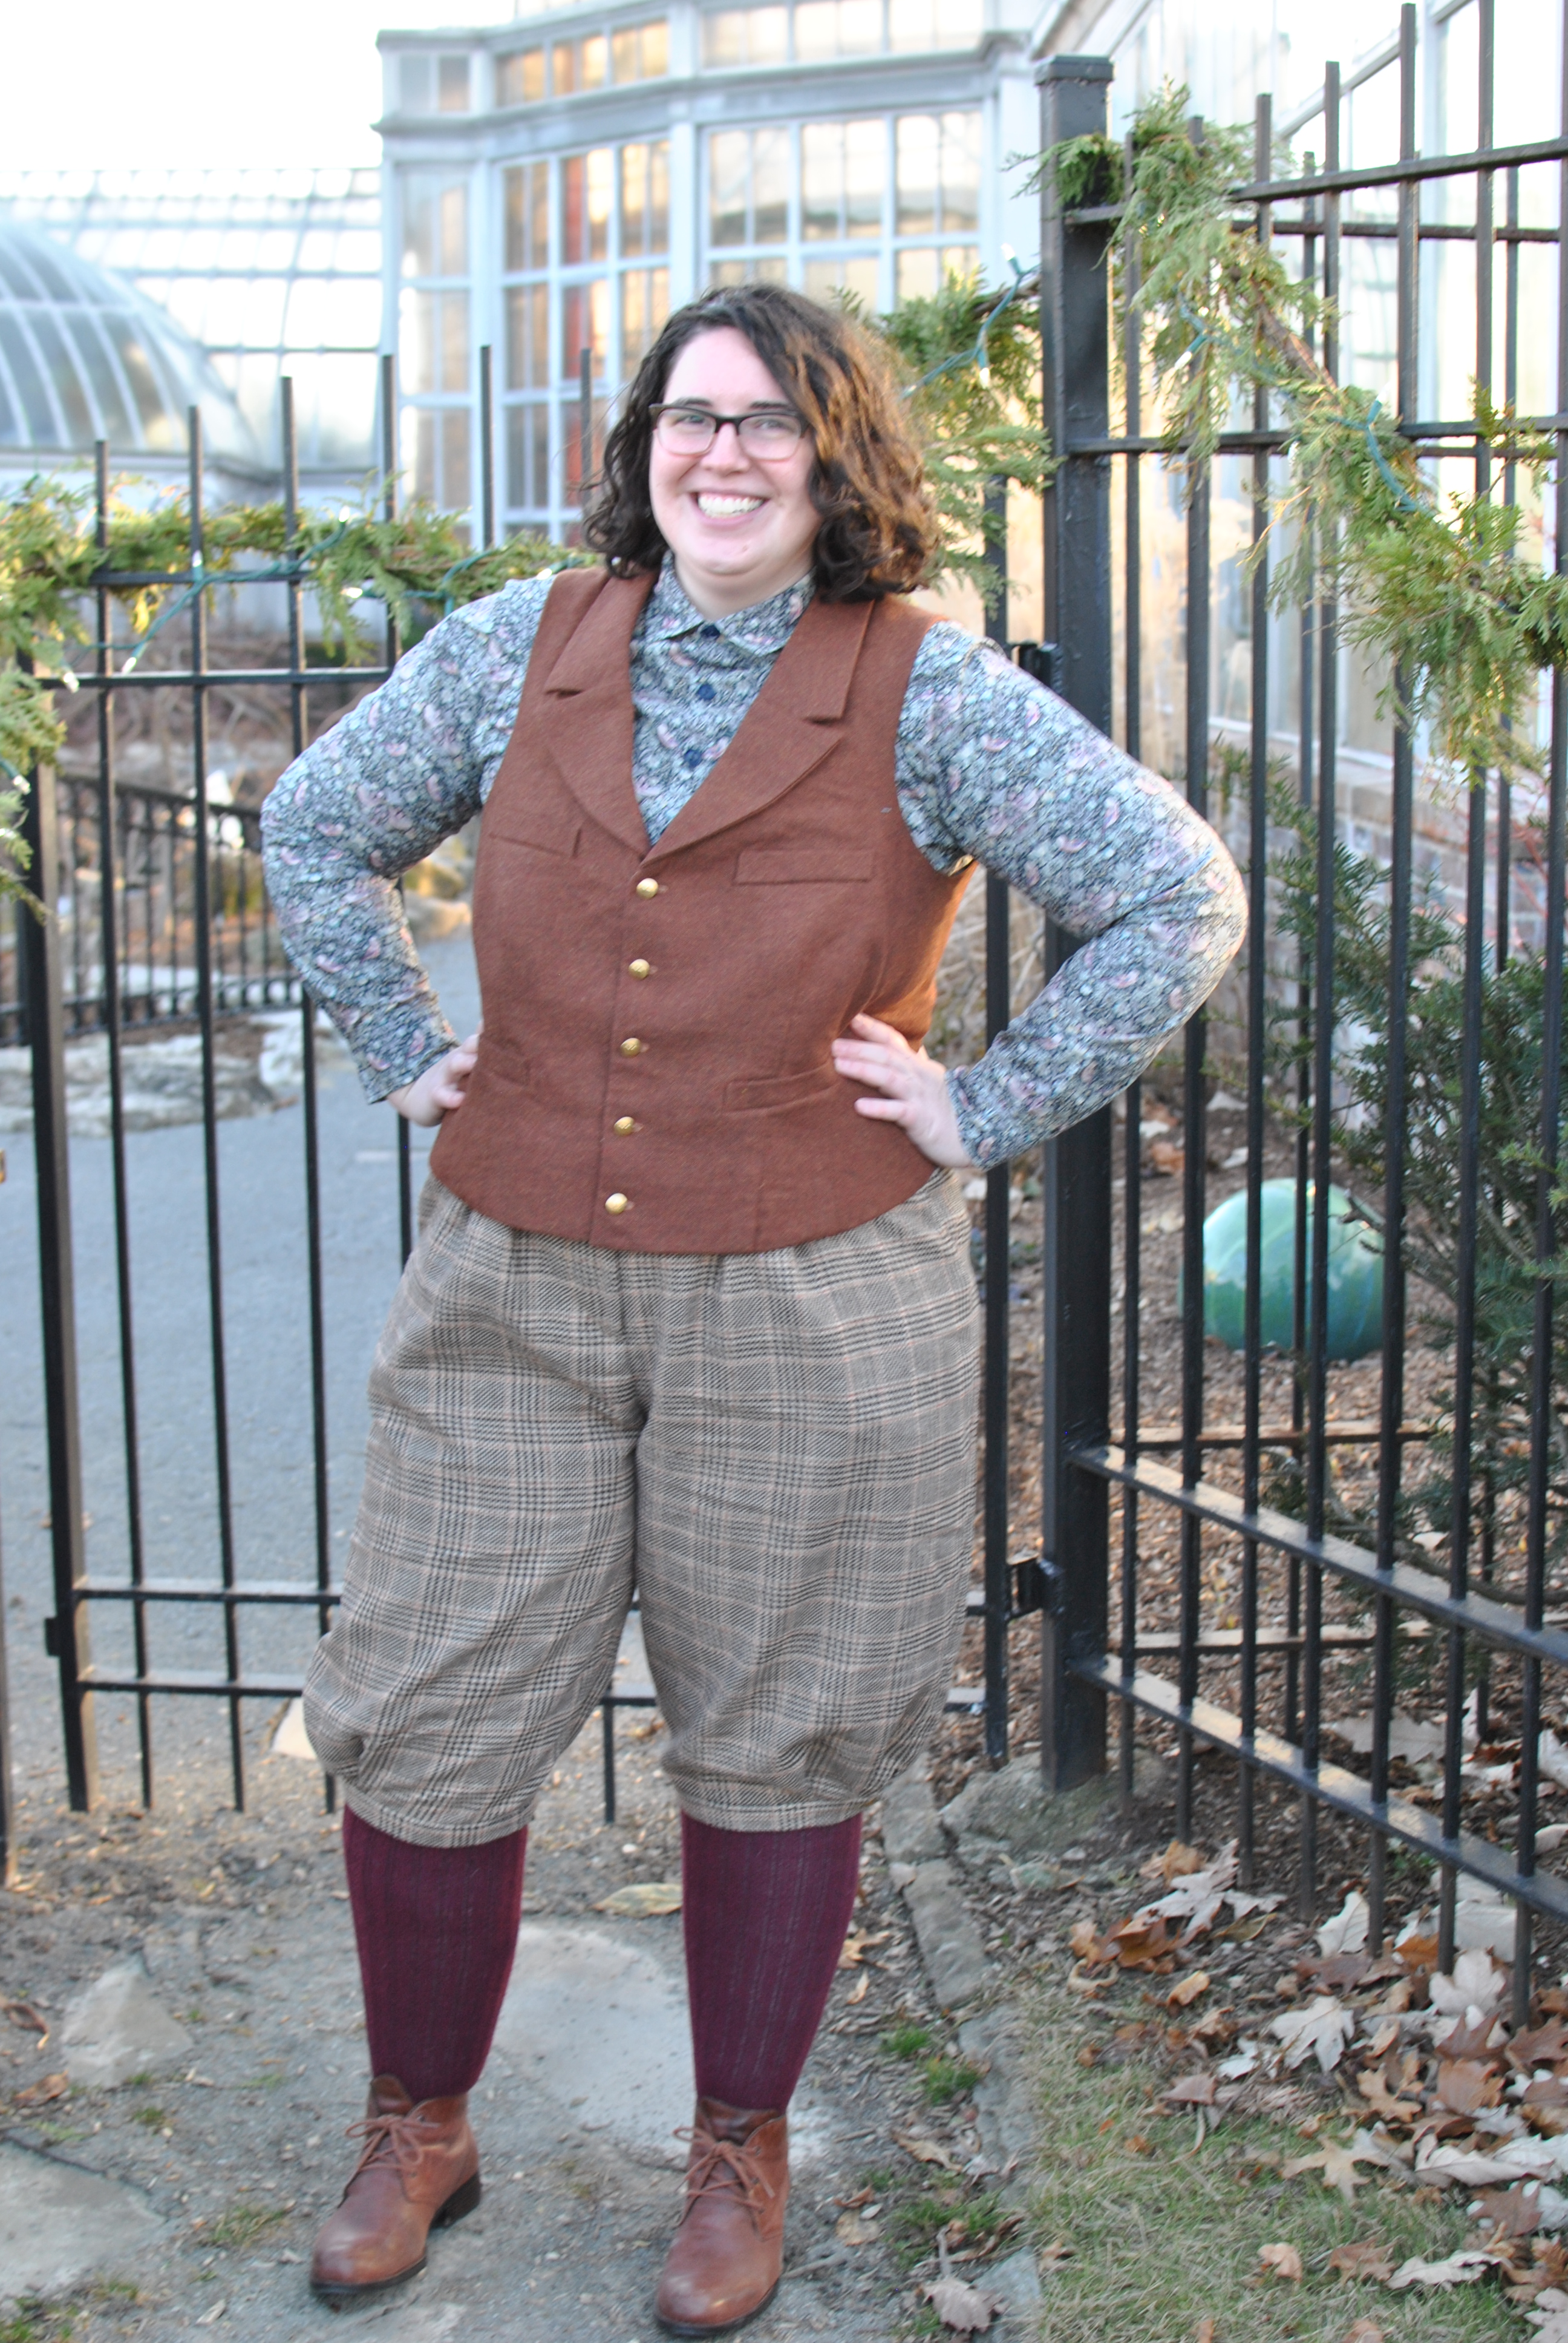 Shannon standing outdoors in front of an iron gate, wearing plaid knickerbockers, a rust wool vest, and a patterned shirt.